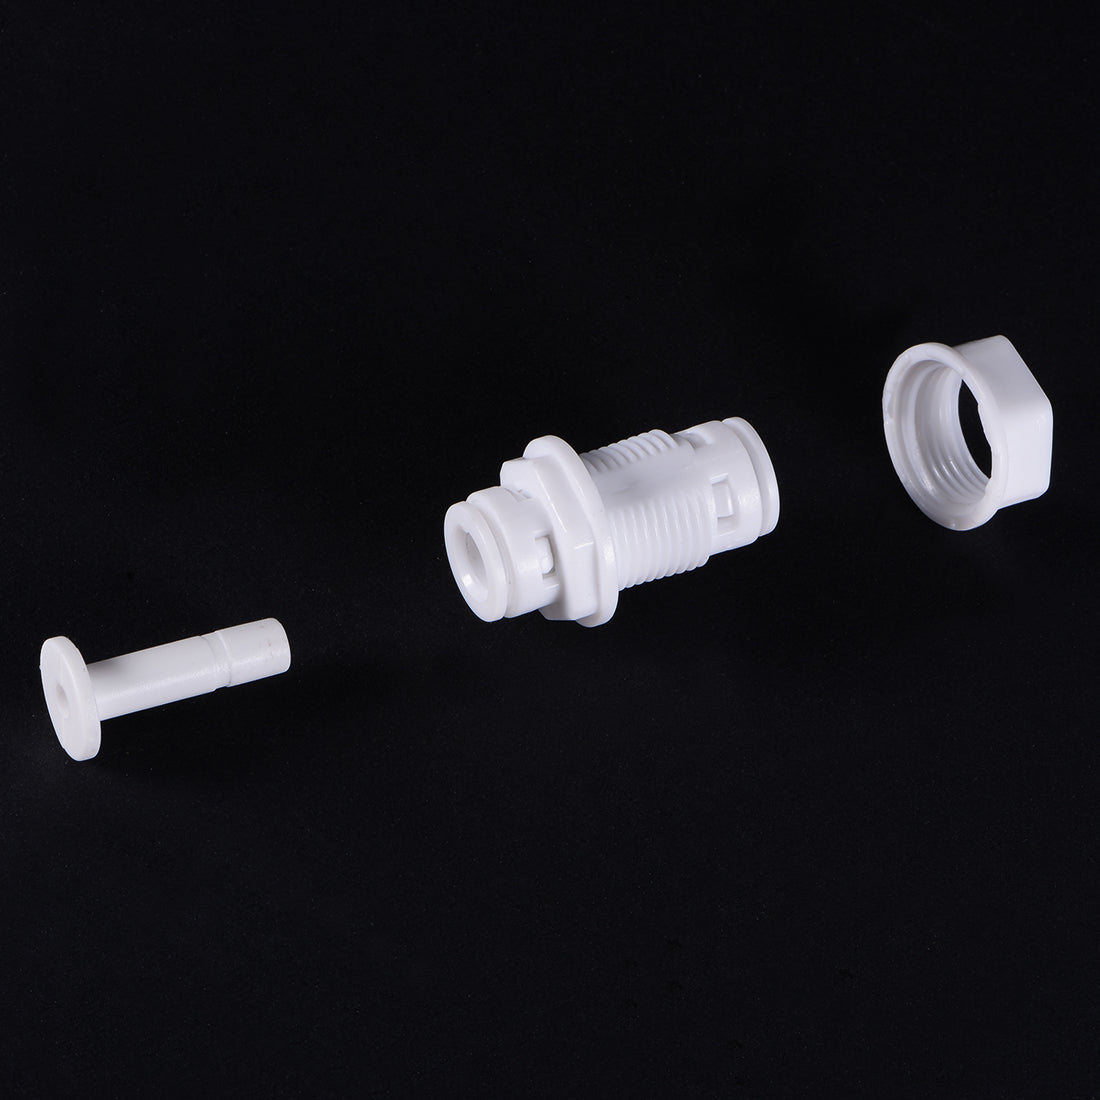 uxcell Uxcell Quick Union Bulkhead Connector 1/4" to 1/4", Straight Connect Fittings for RO Water Purifier, 34mm White 10Pcs